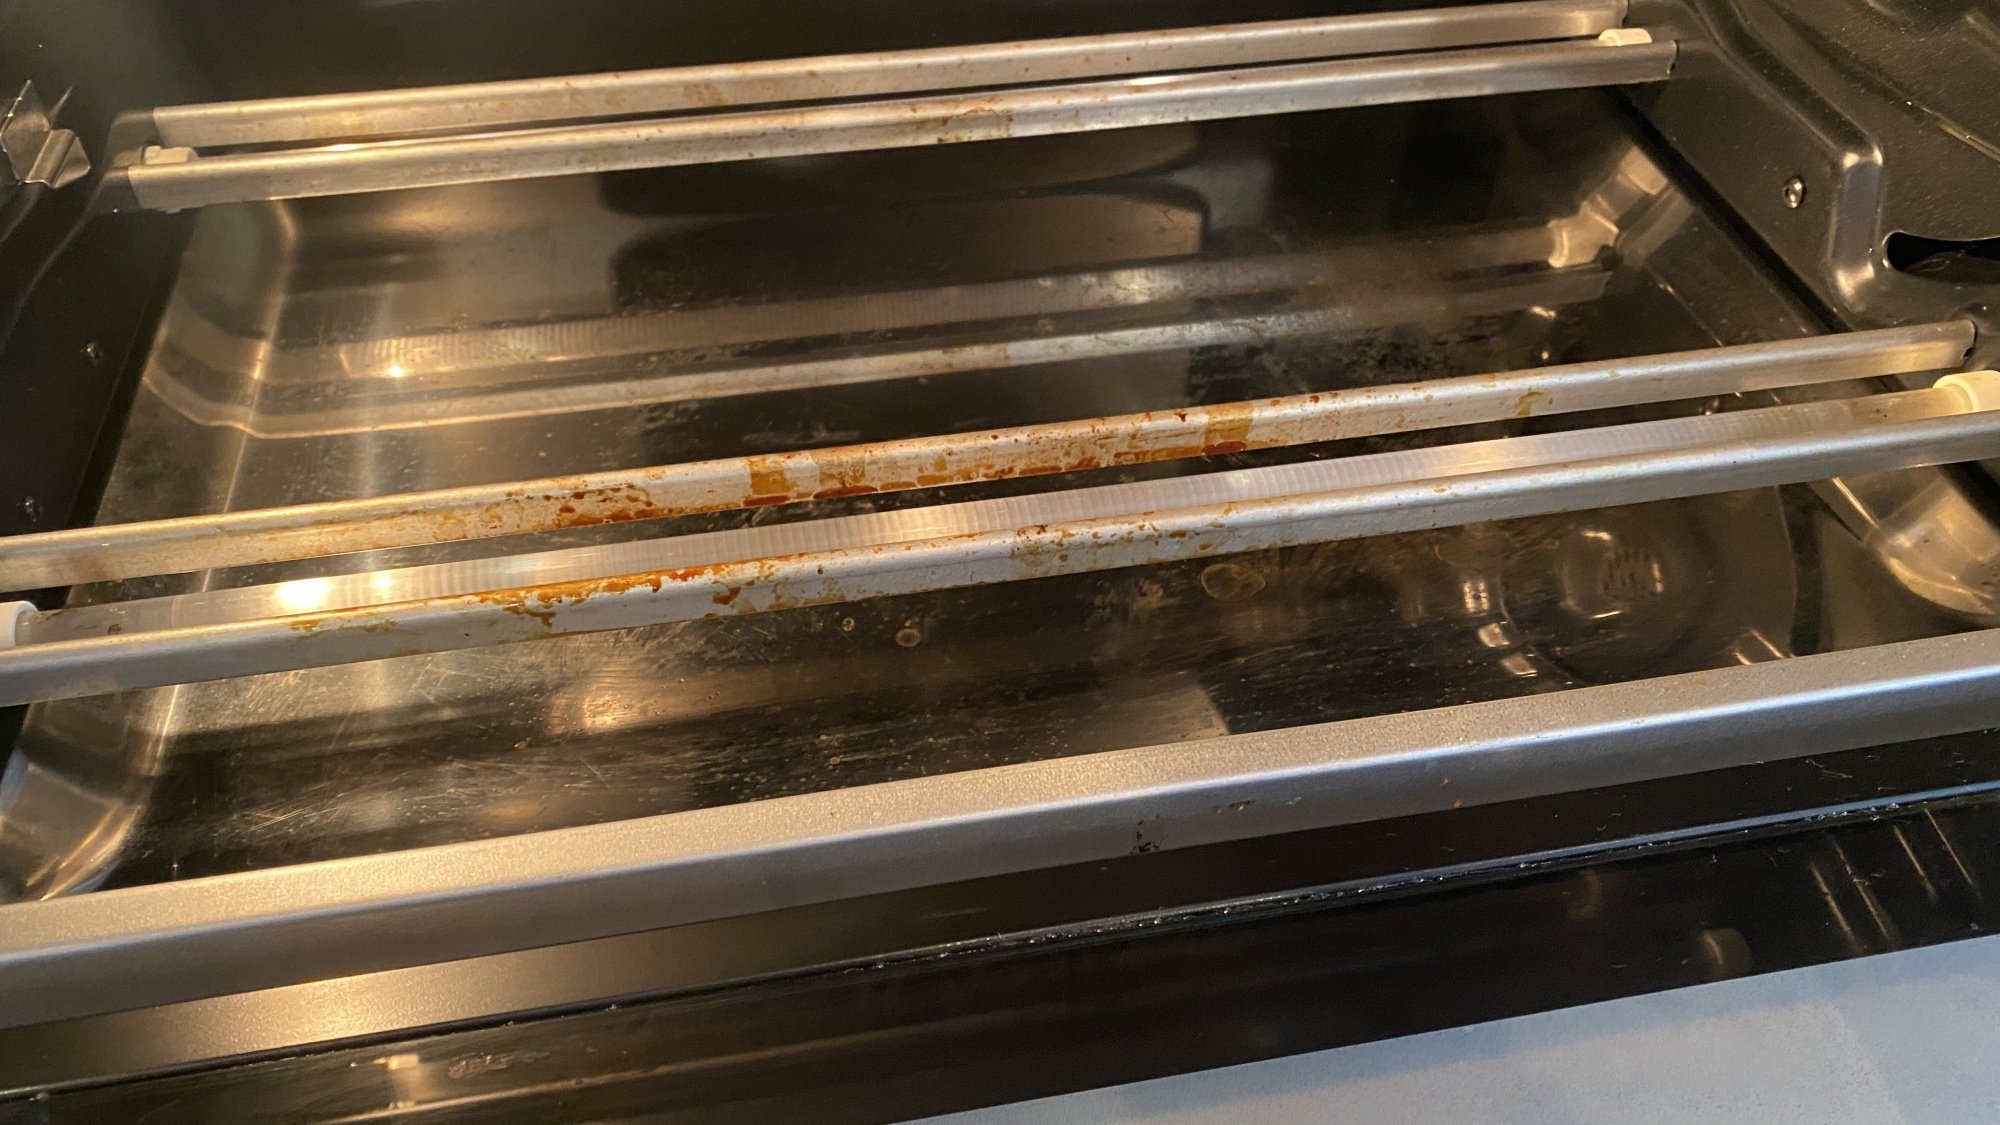 Grease stains from cooking on the inside of a toaster oven